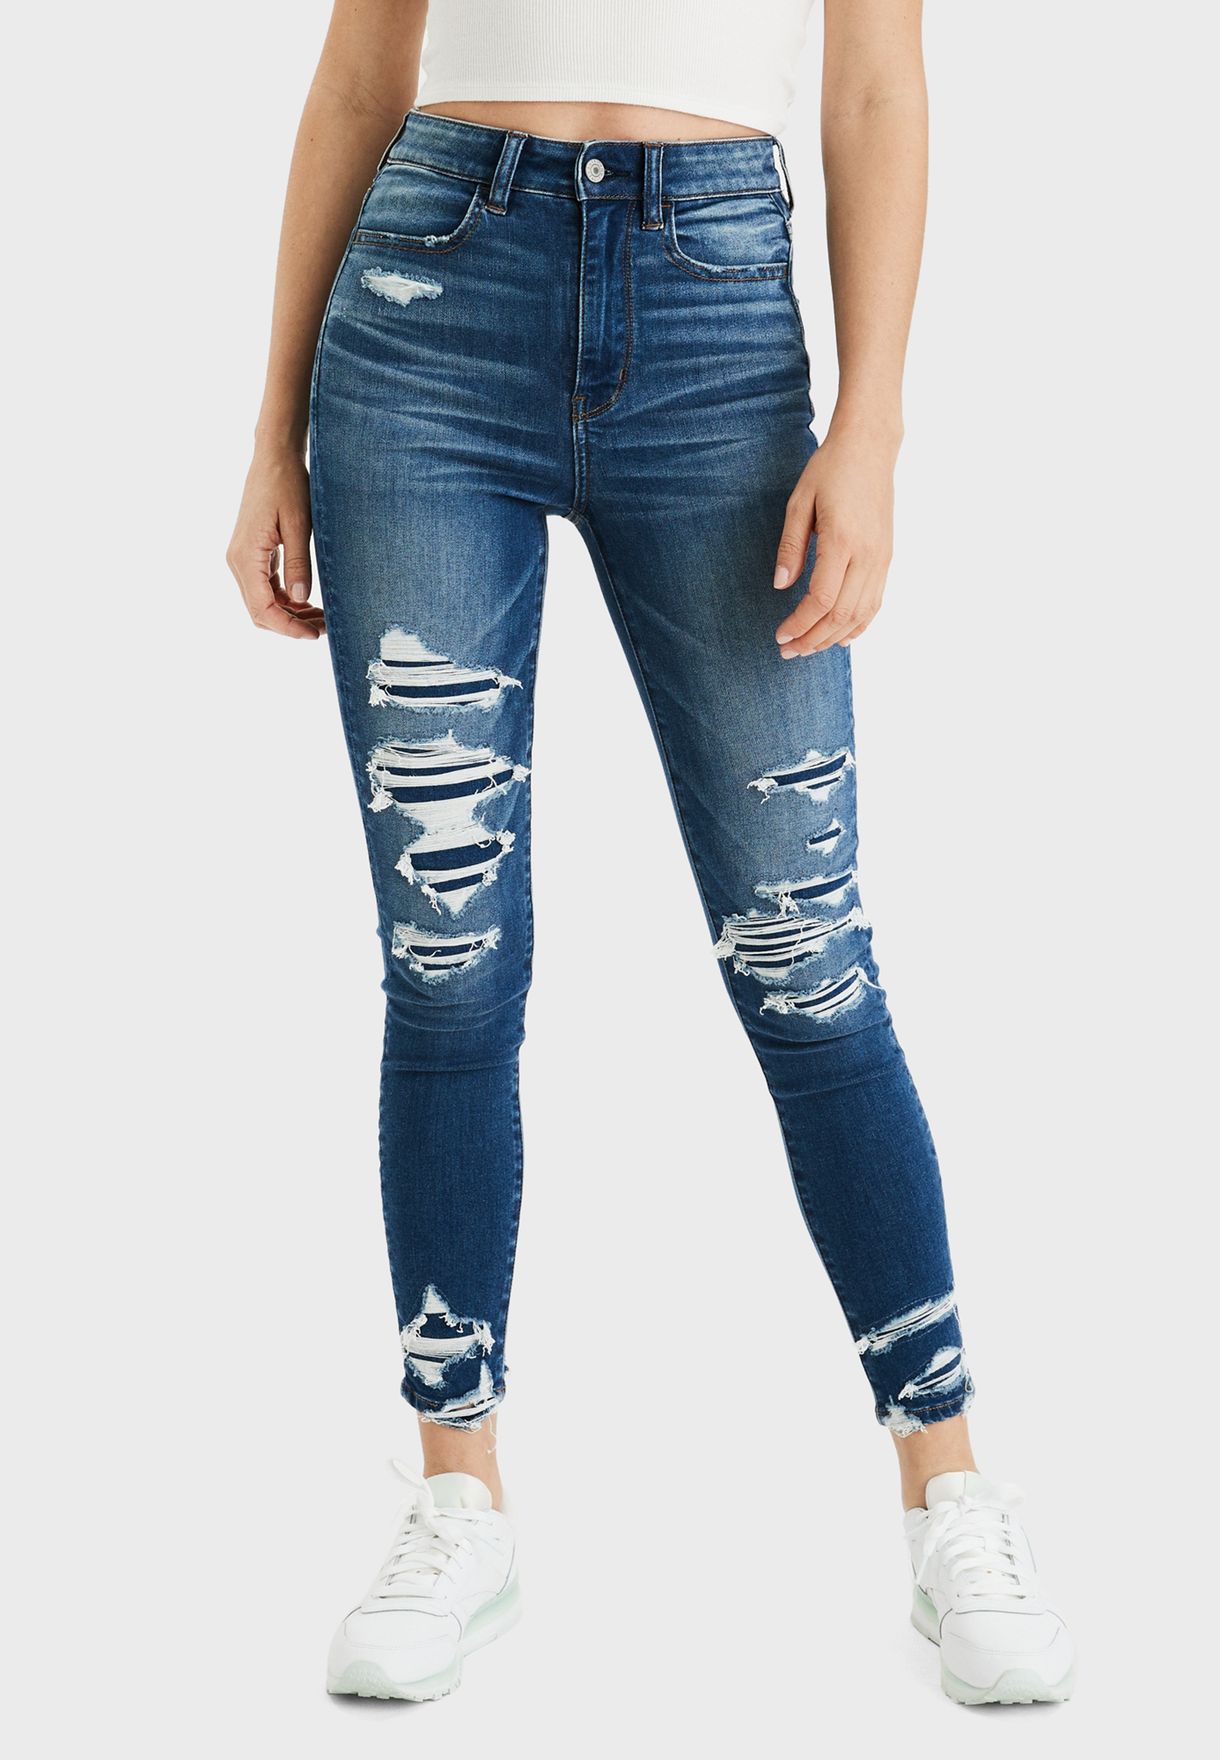 🔴 The best skinny jeans | American eagle skinny jeans 